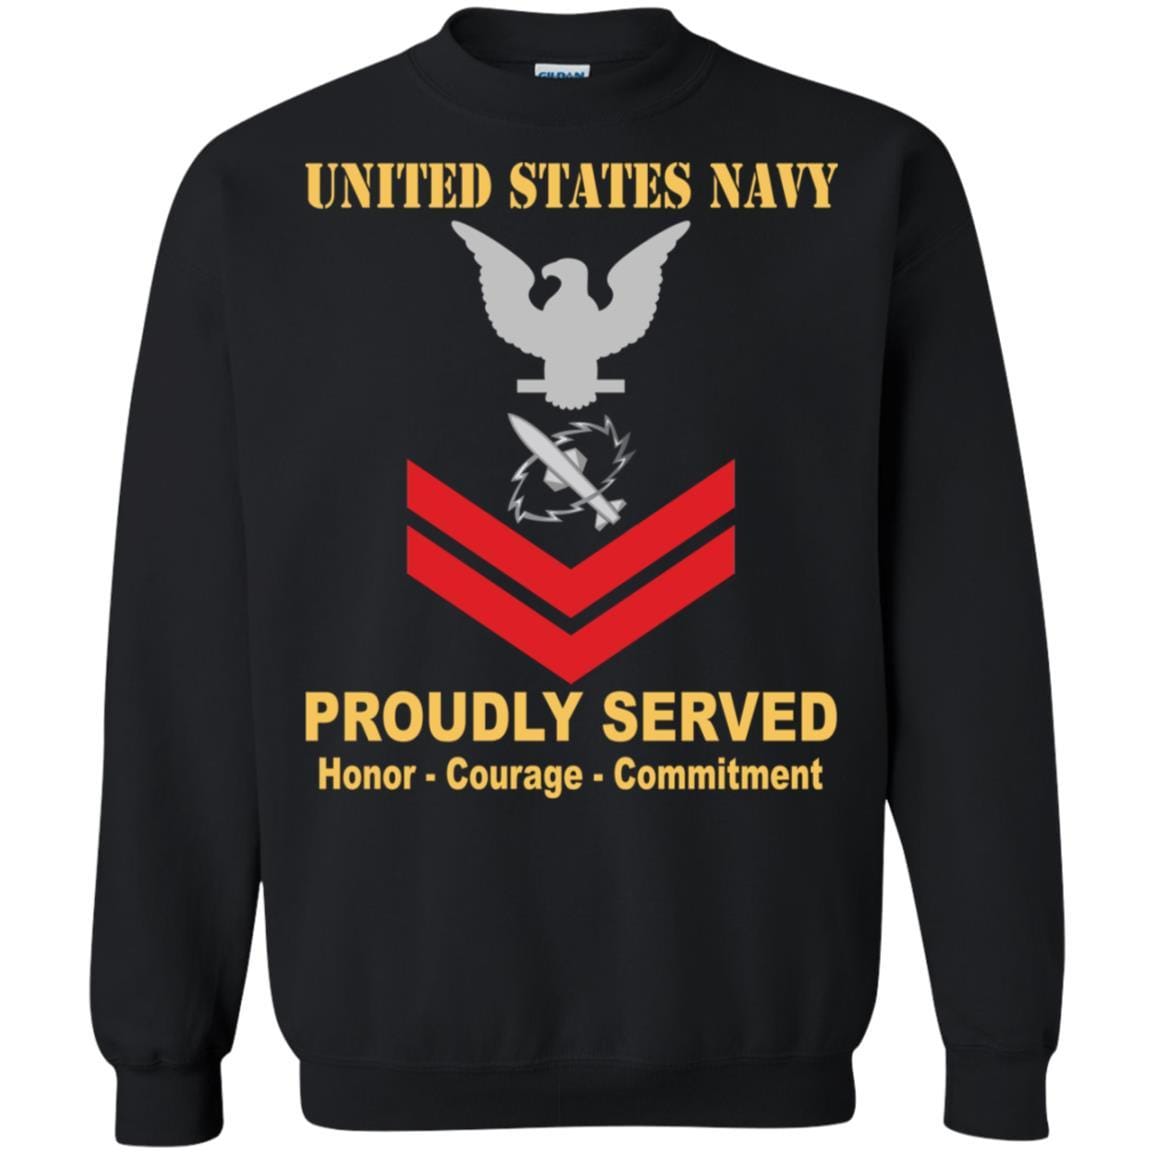 Navy Missile Technician Navy MT E-5 Rating Badges Proudly Served T-Shirt For Men On Front-TShirt-Navy-Veterans Nation